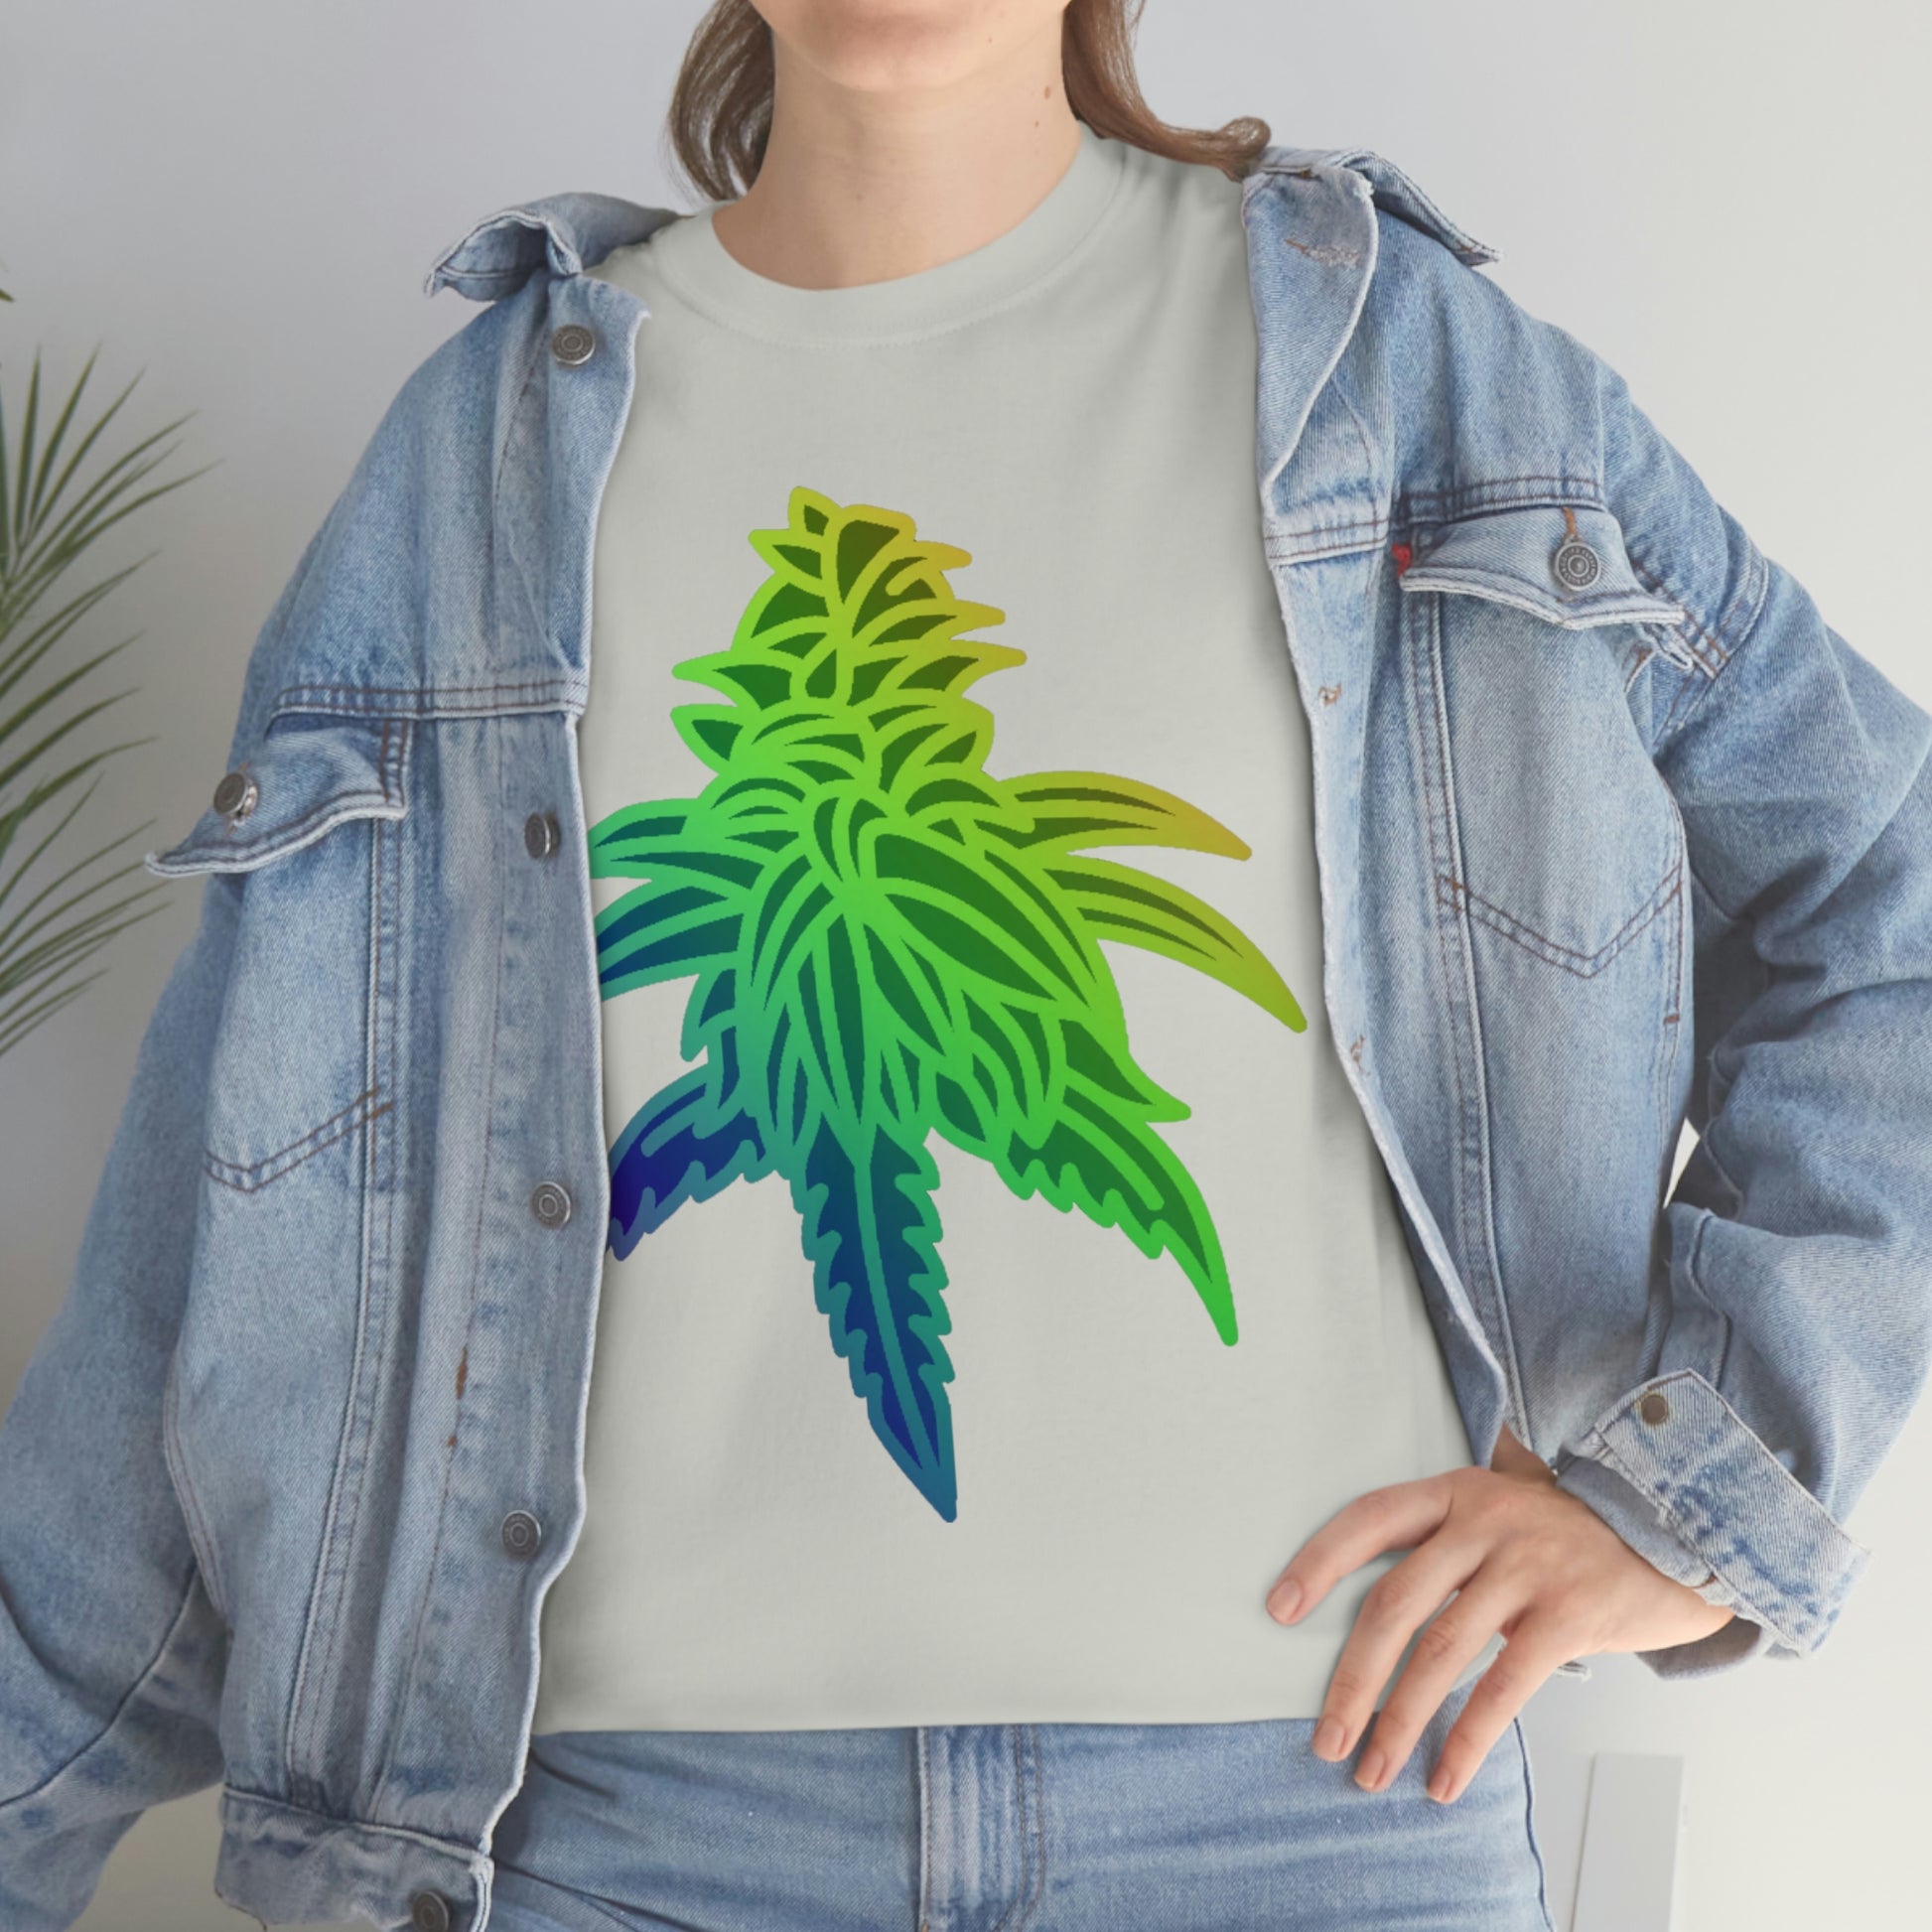 a woman in a jacket is wearing a Rainbow Sherbet Cannabis Tee with a colorful marijuana leaf on it.